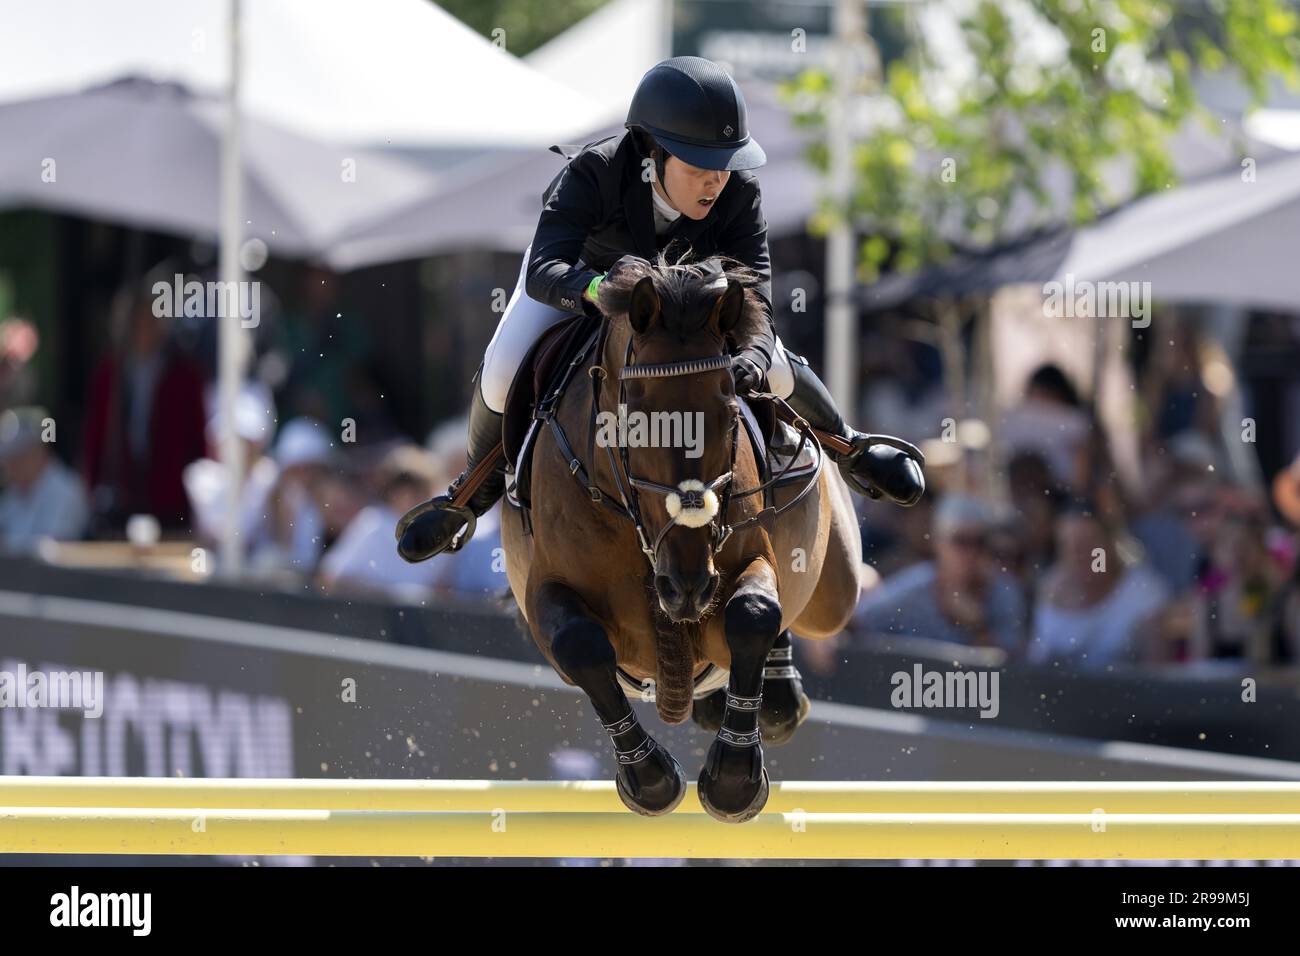 ROTTERDAM - Victoria Gulliksen with Mistral van de Vogelzang in action during the Nations Cup jumping at CHIO Rotterdam. The equestrian event takes place for the 74th time in the Kralingse Bos in Rotterdam. AP SANDER KING Stock Photo